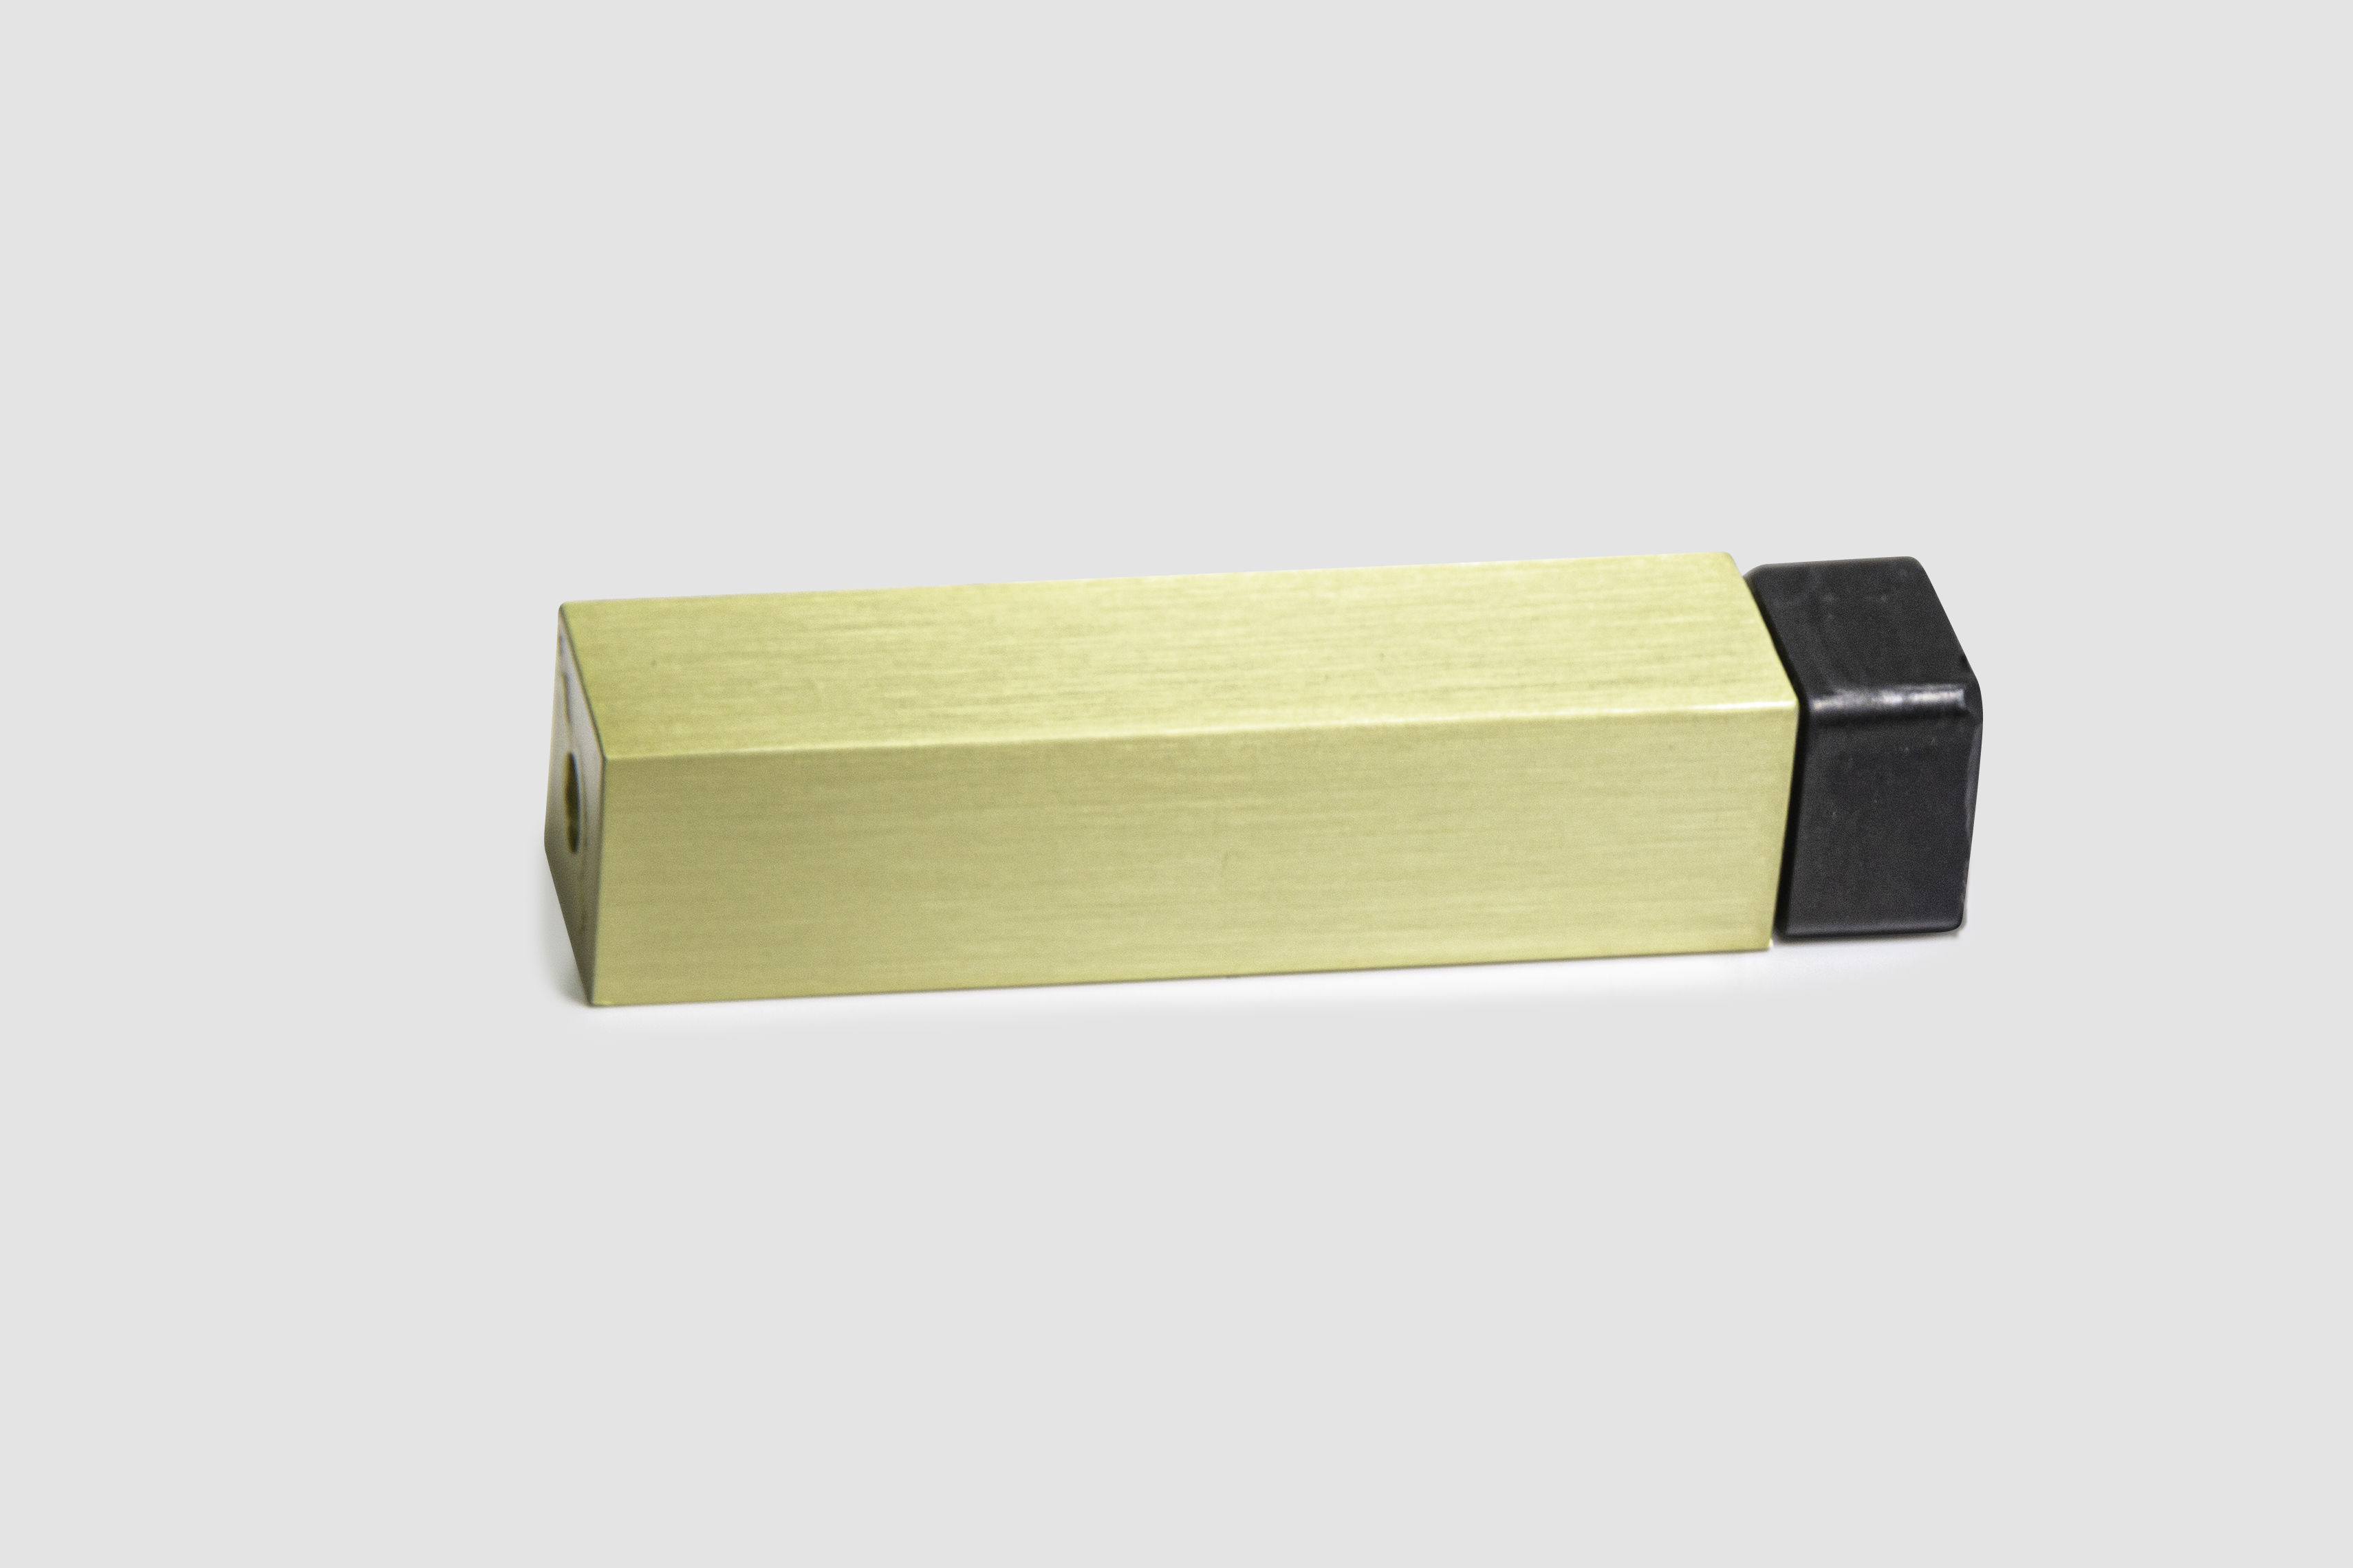 Modern Square Door Stop Baseboard / Wall Mounted in various finishes Toronto Door Hardware